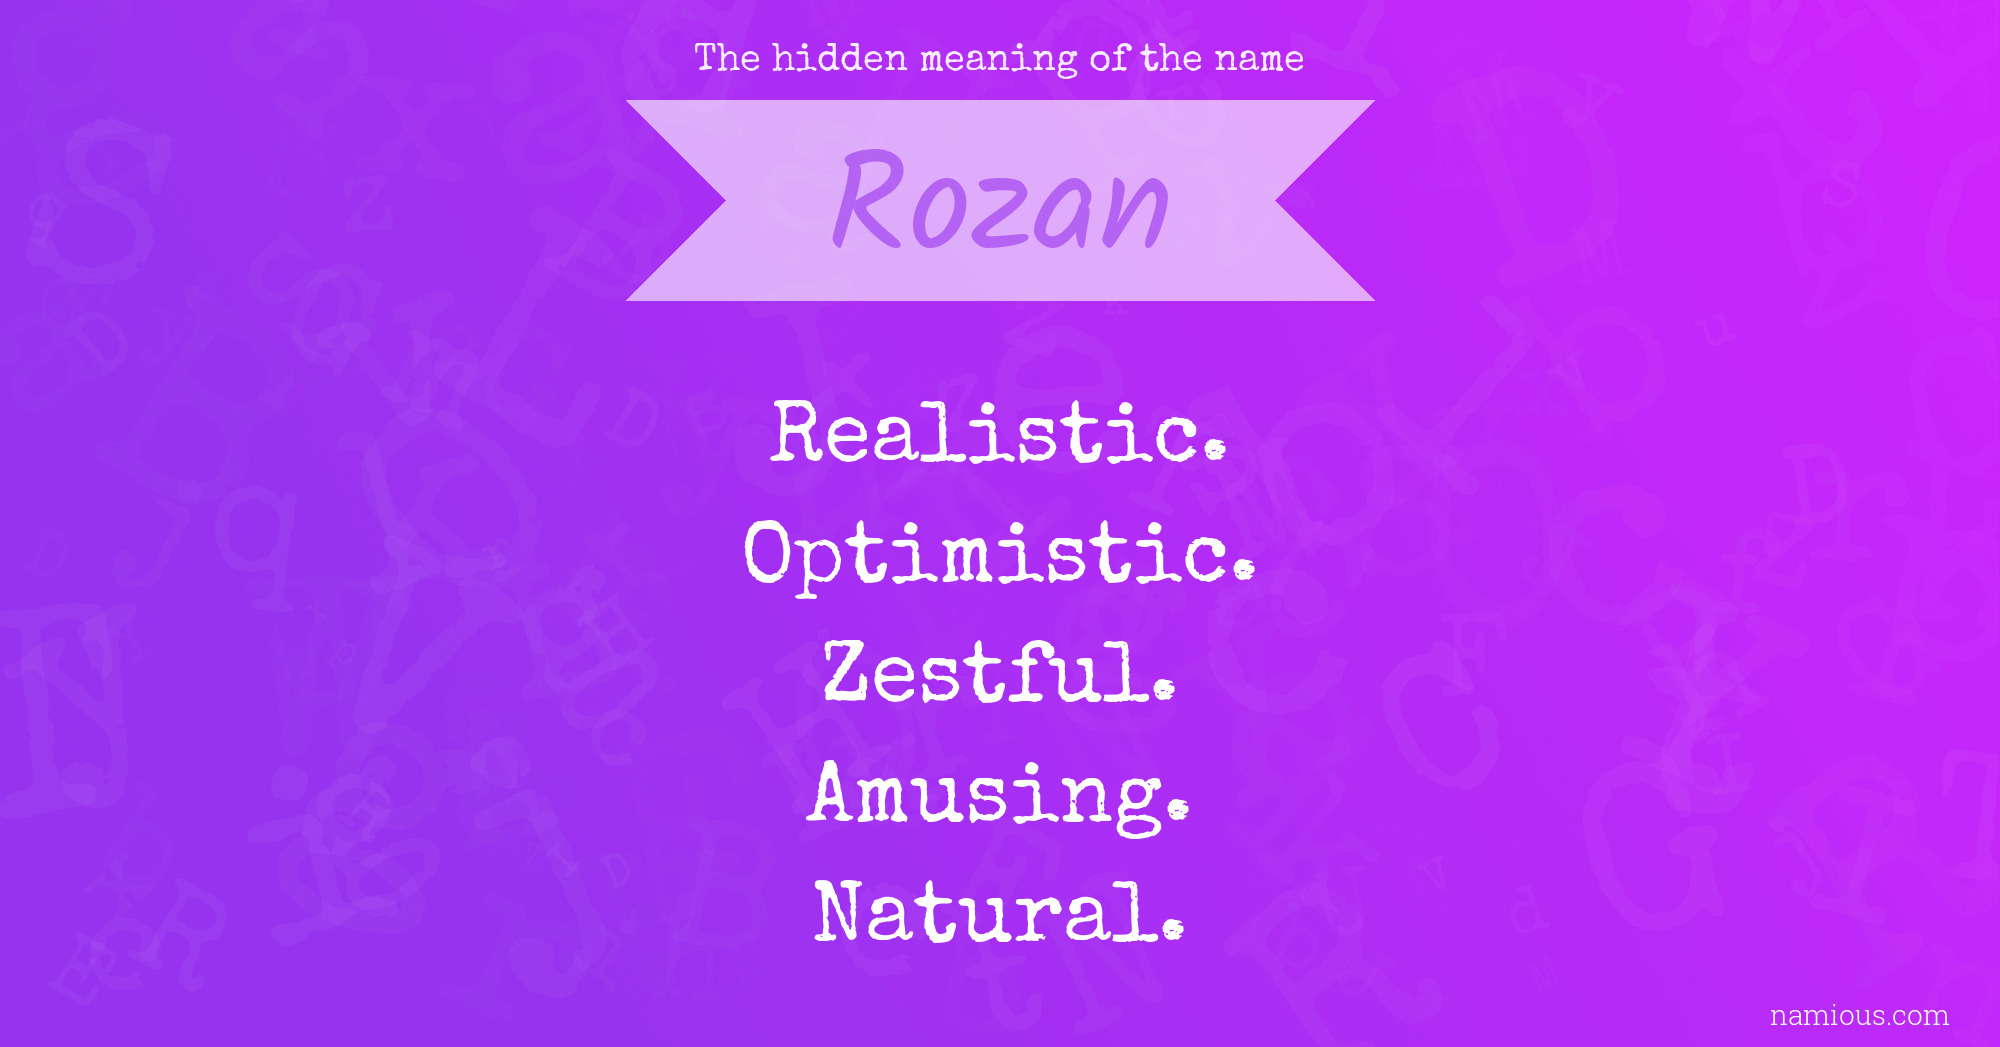 The hidden meaning of the name Rozan